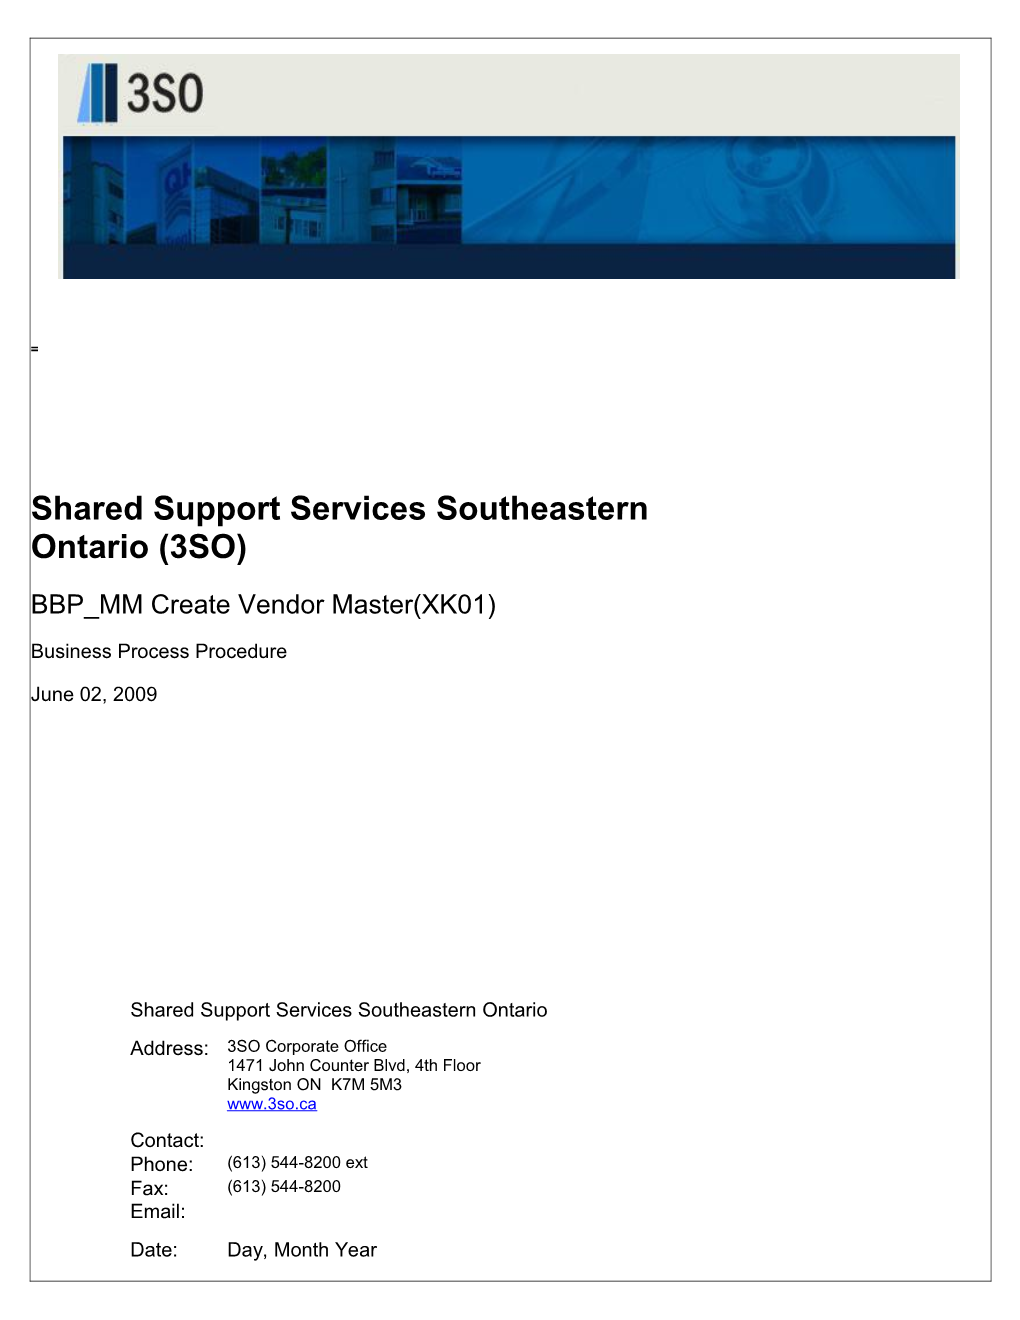 Shared Support Services Southeastern Ontario (3SO)